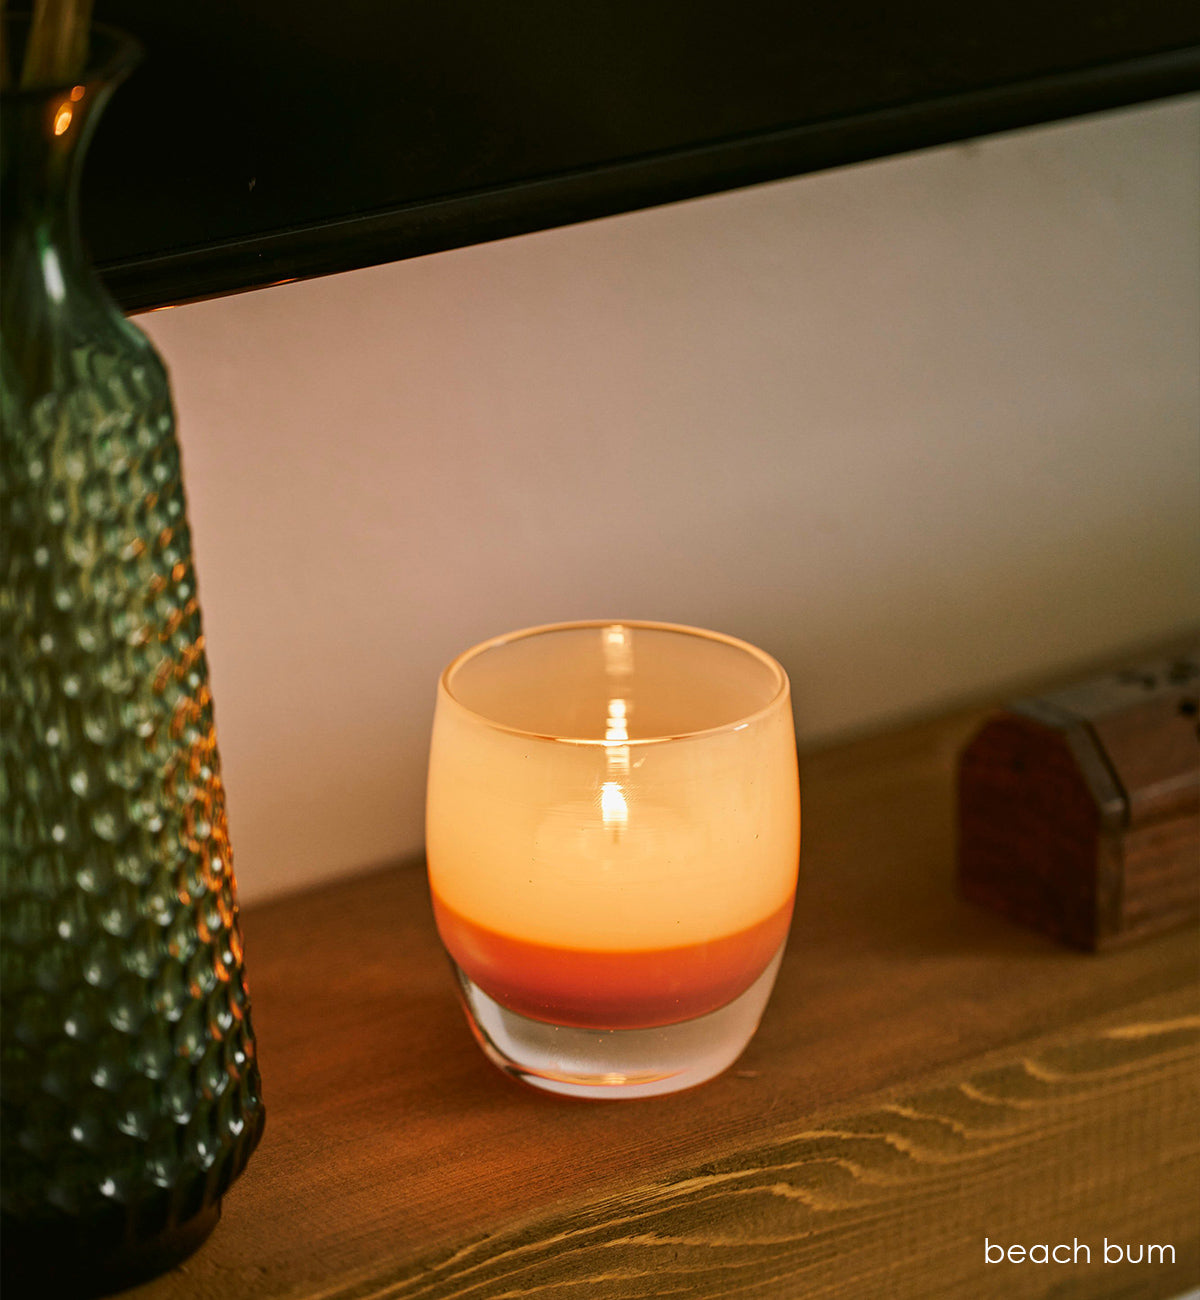 beach bum, tan hand-blown glass votive candle holder on a wood mantle next to a green vase, wood box and screen above.